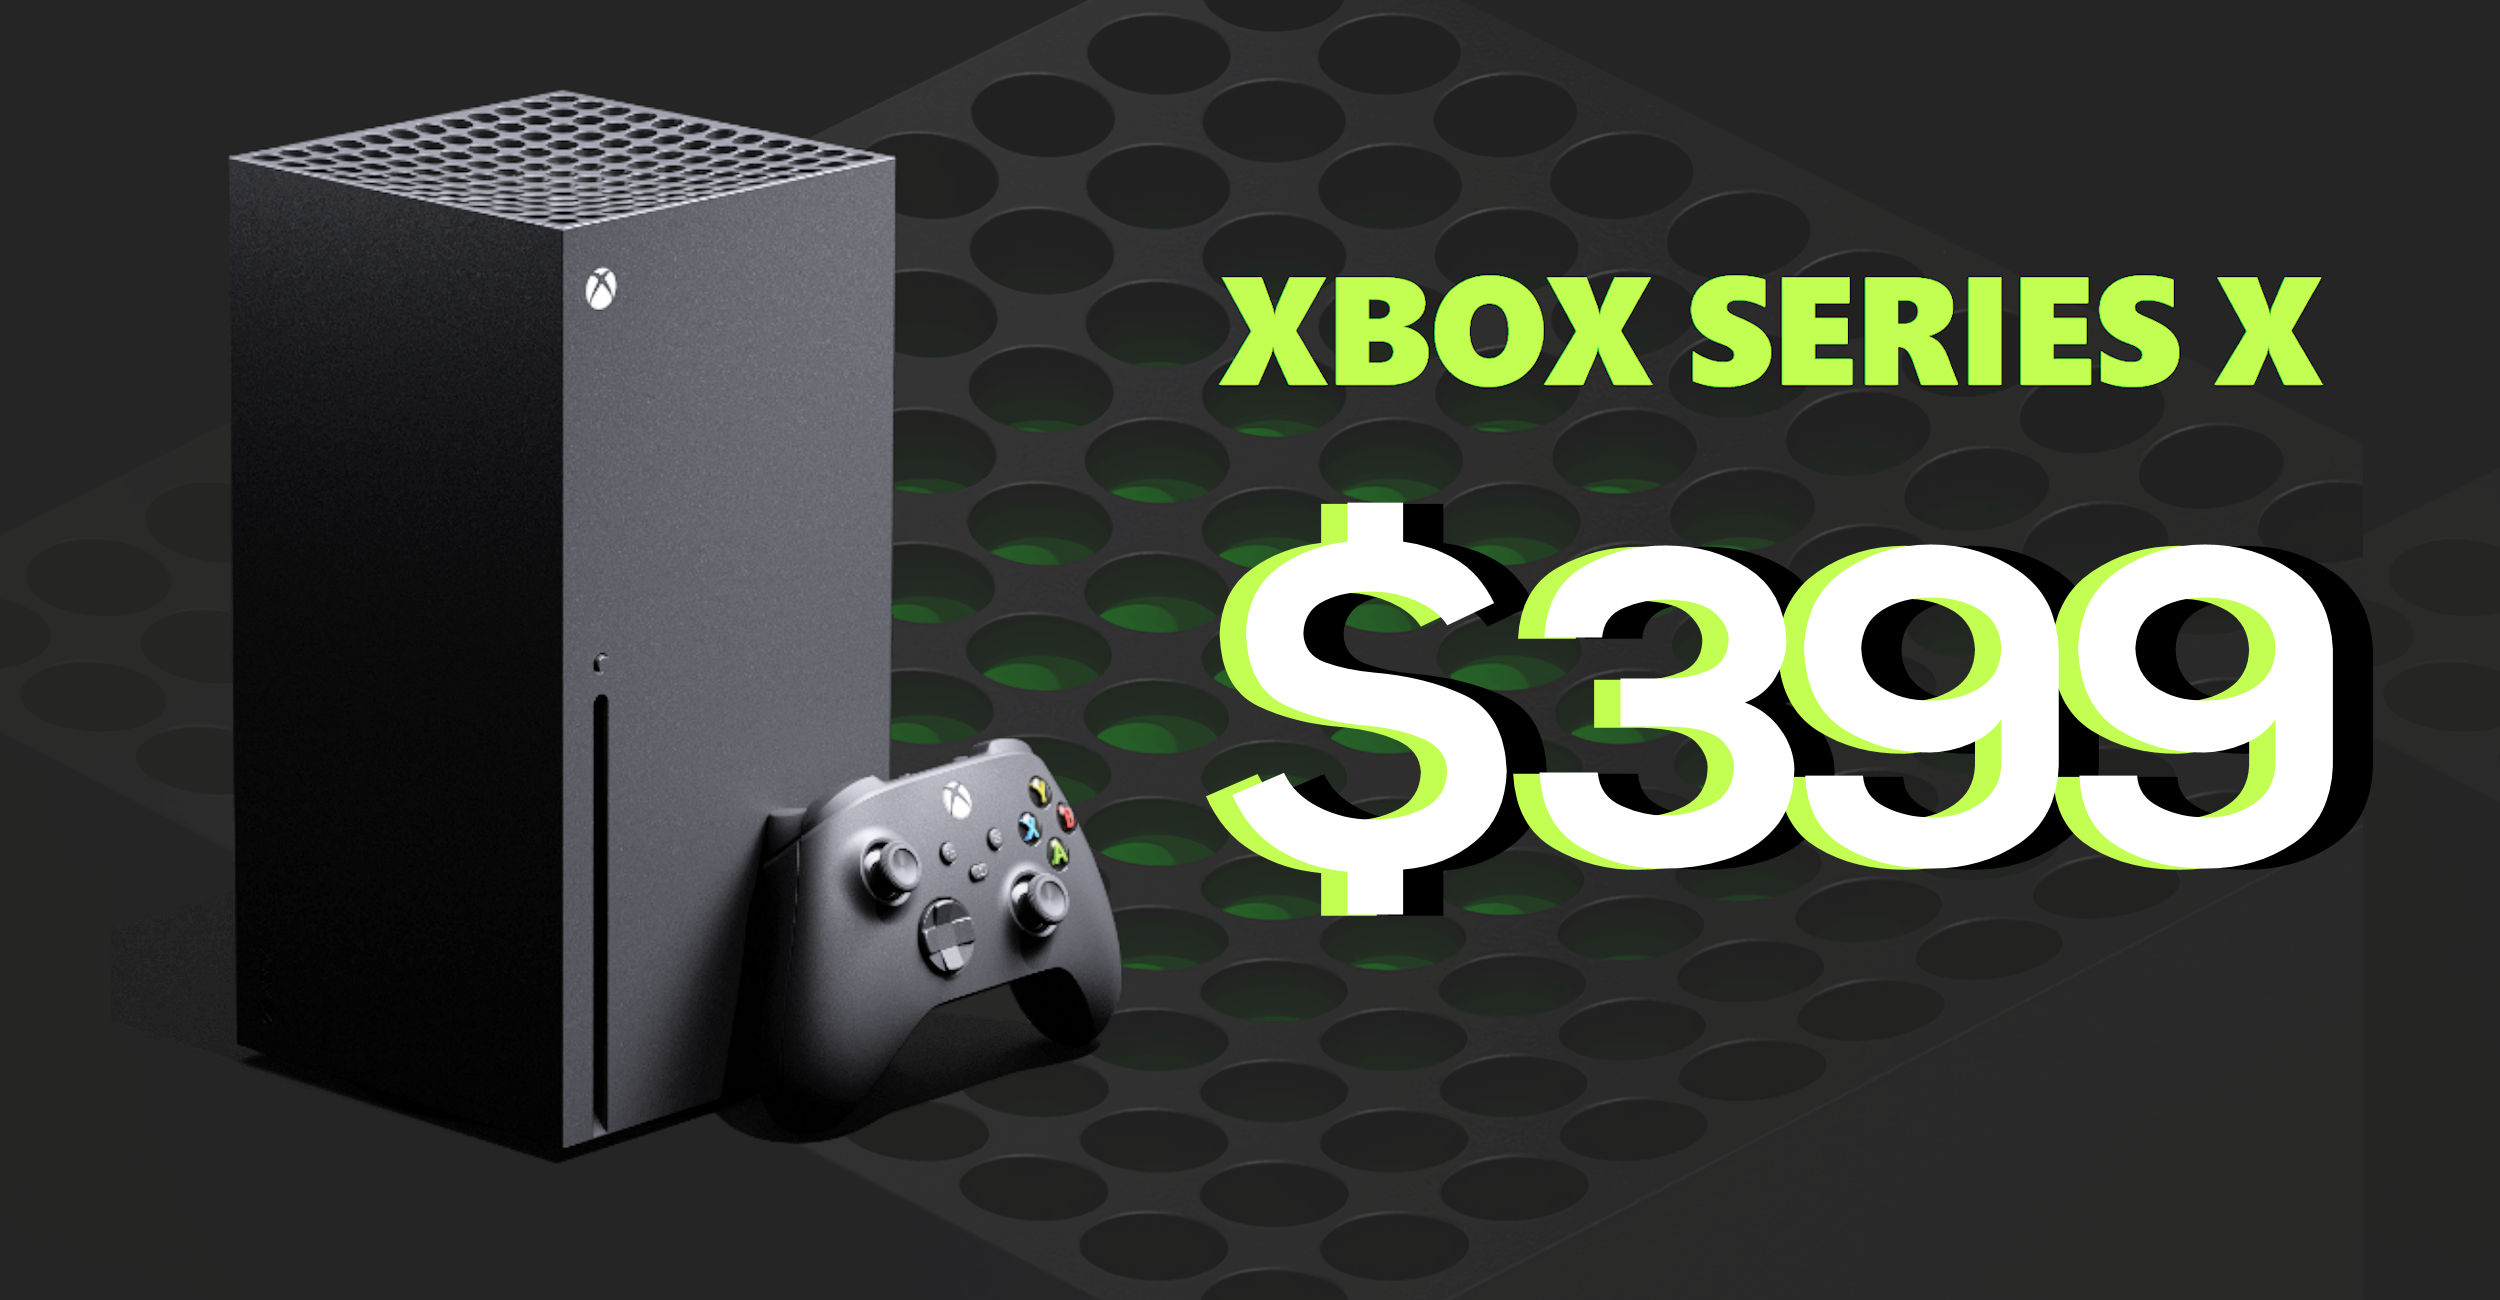 Xbox Series X drops to $399 in US, Series S at $239 - VideoCardz.com